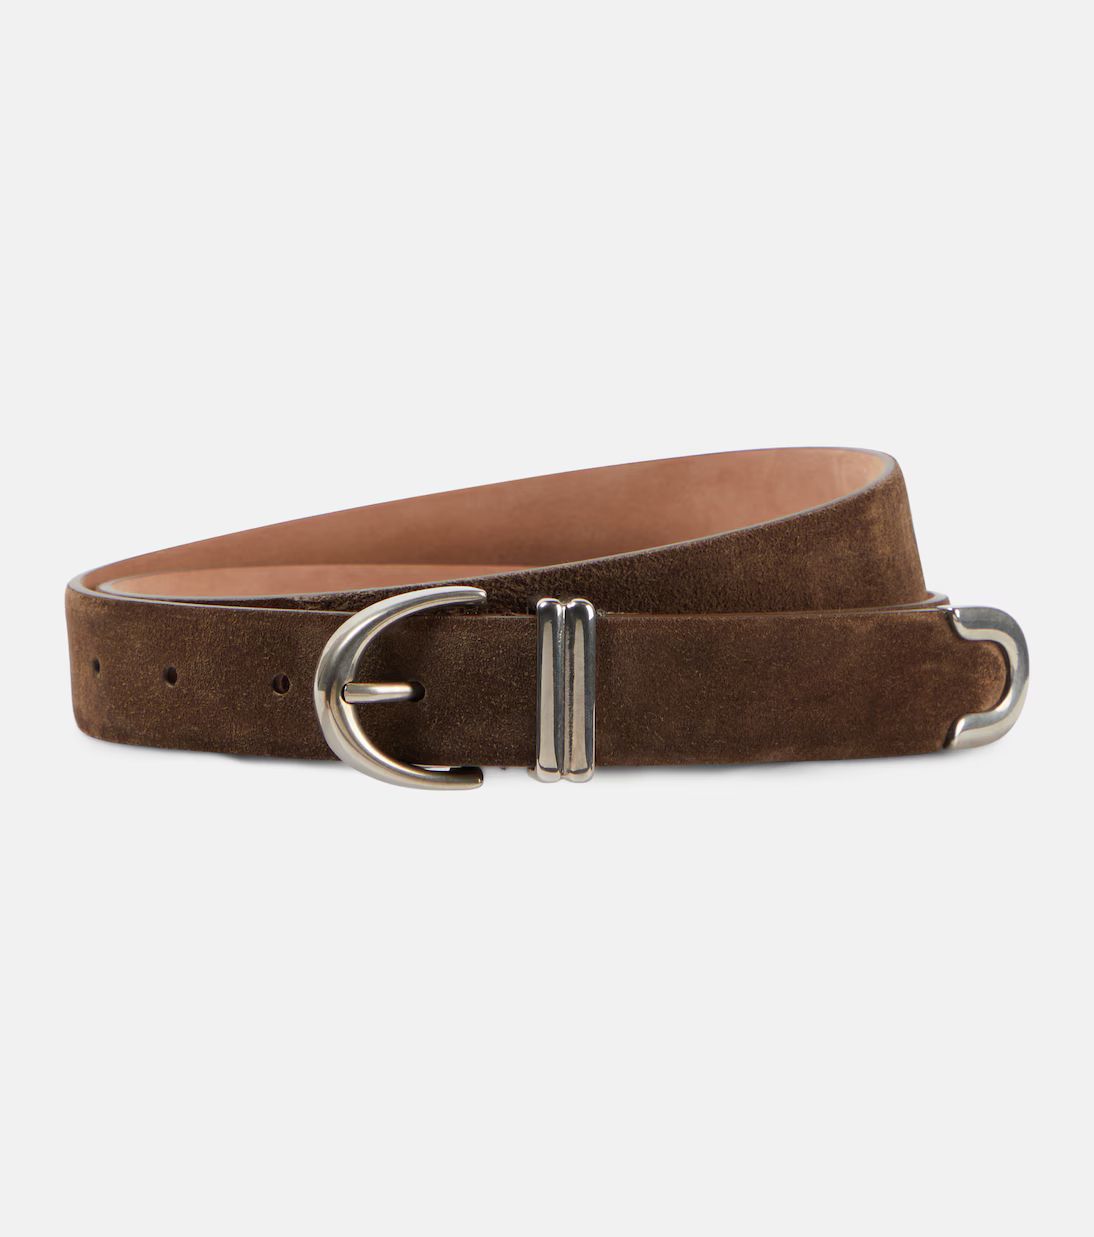 KhaiteBambi suede belt $ 545incl. duties and handling fees; excl. taxes and shipping costsChoose ... | Mytheresa (US/CA)